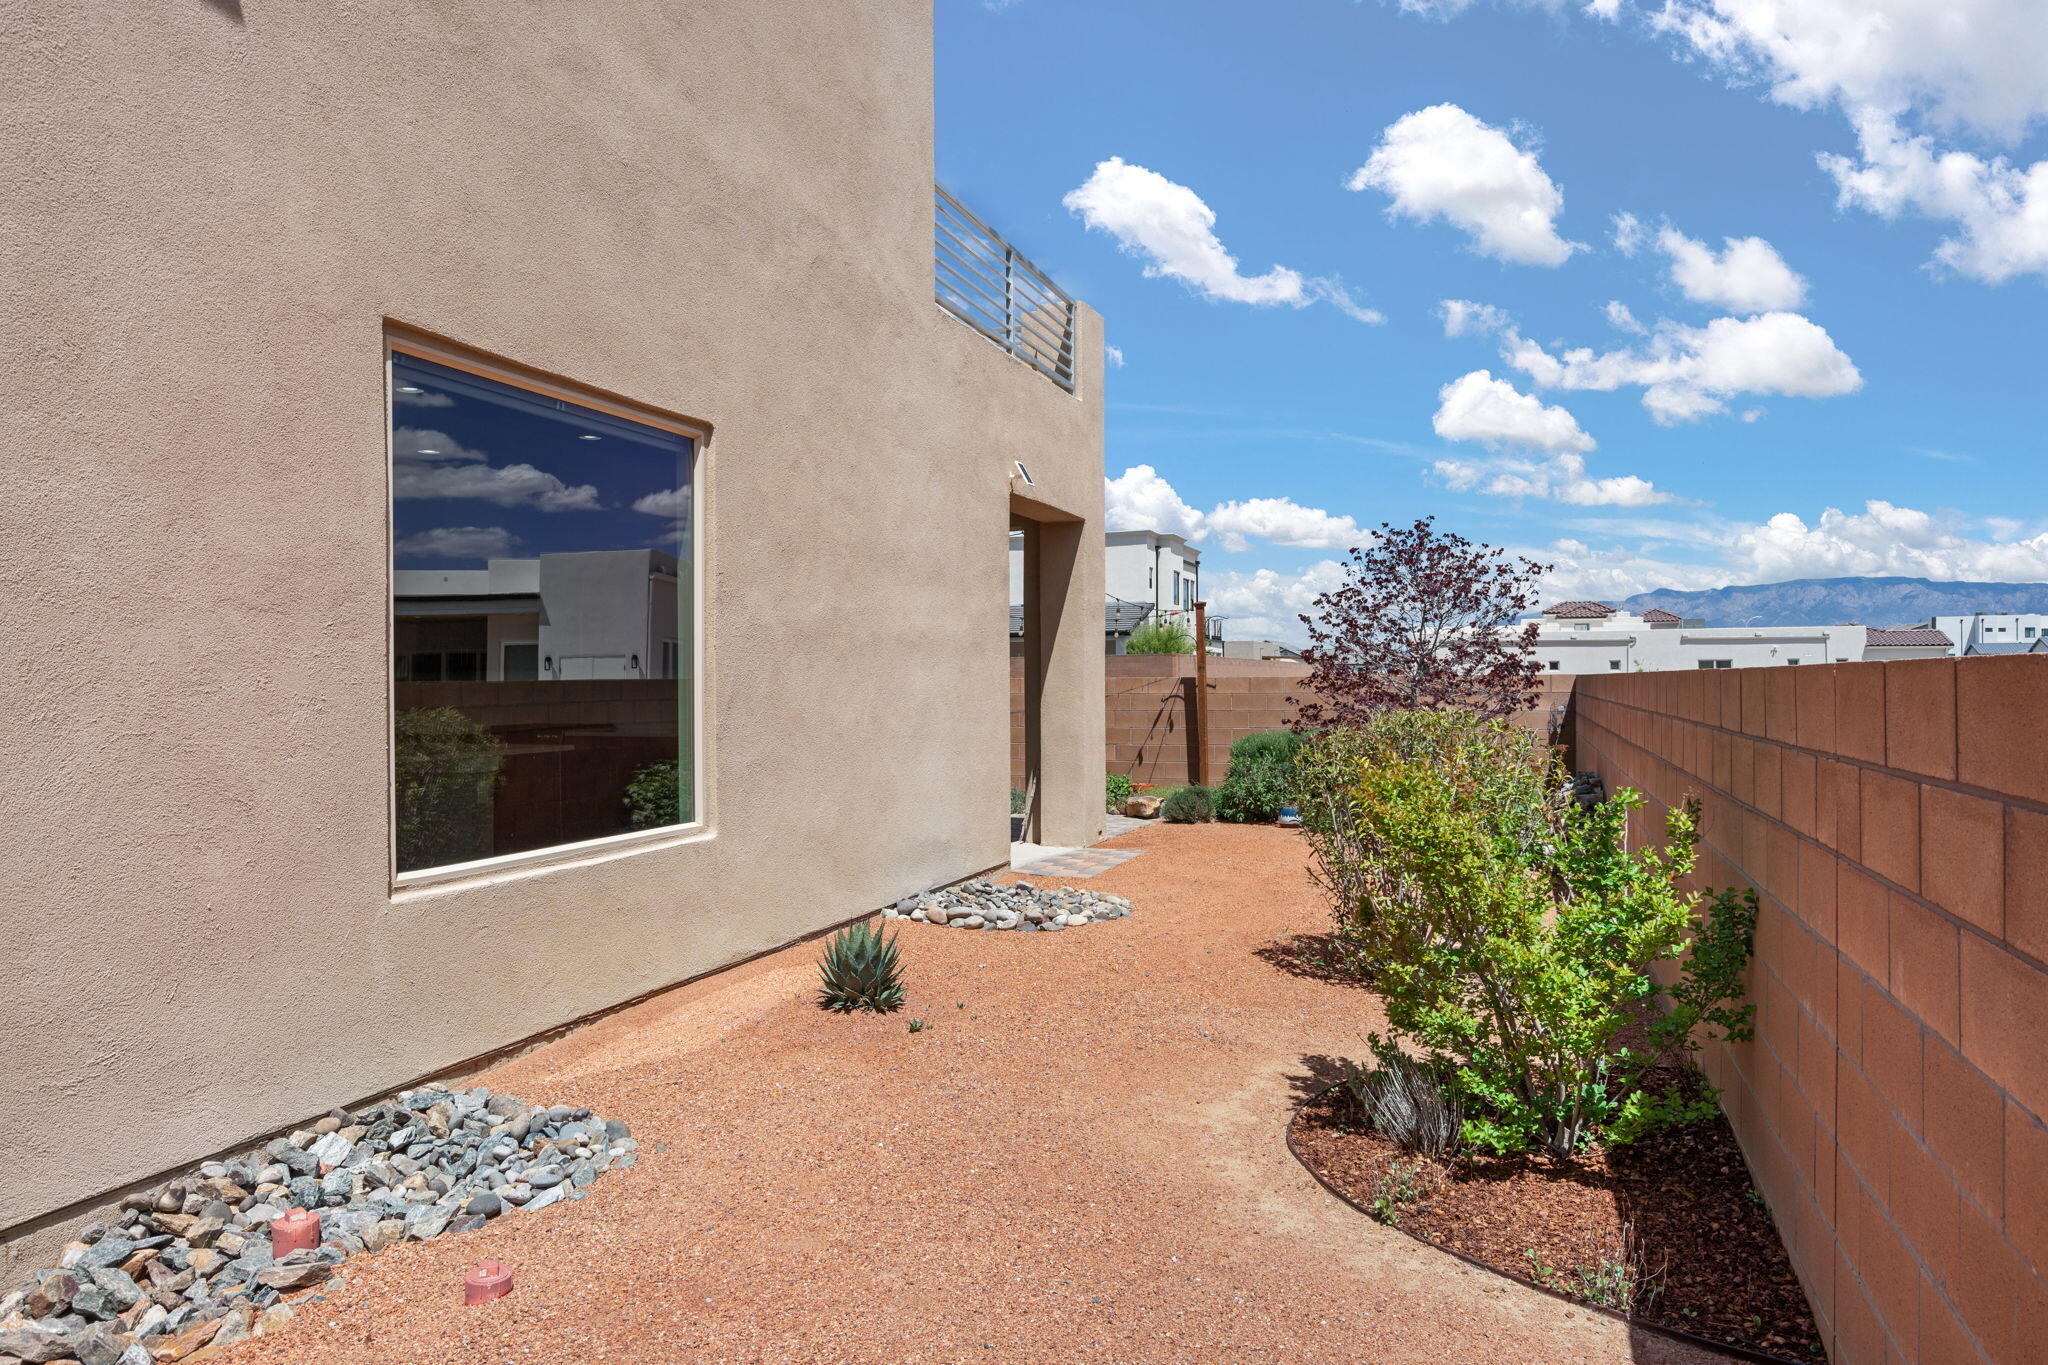 7920 Teaberry Road NW, Albuquerque, New Mexico 87120, 3 Bedrooms Bedrooms, ,3 BathroomsBathrooms,Residential,For Sale,7920 Teaberry Road NW,1061552